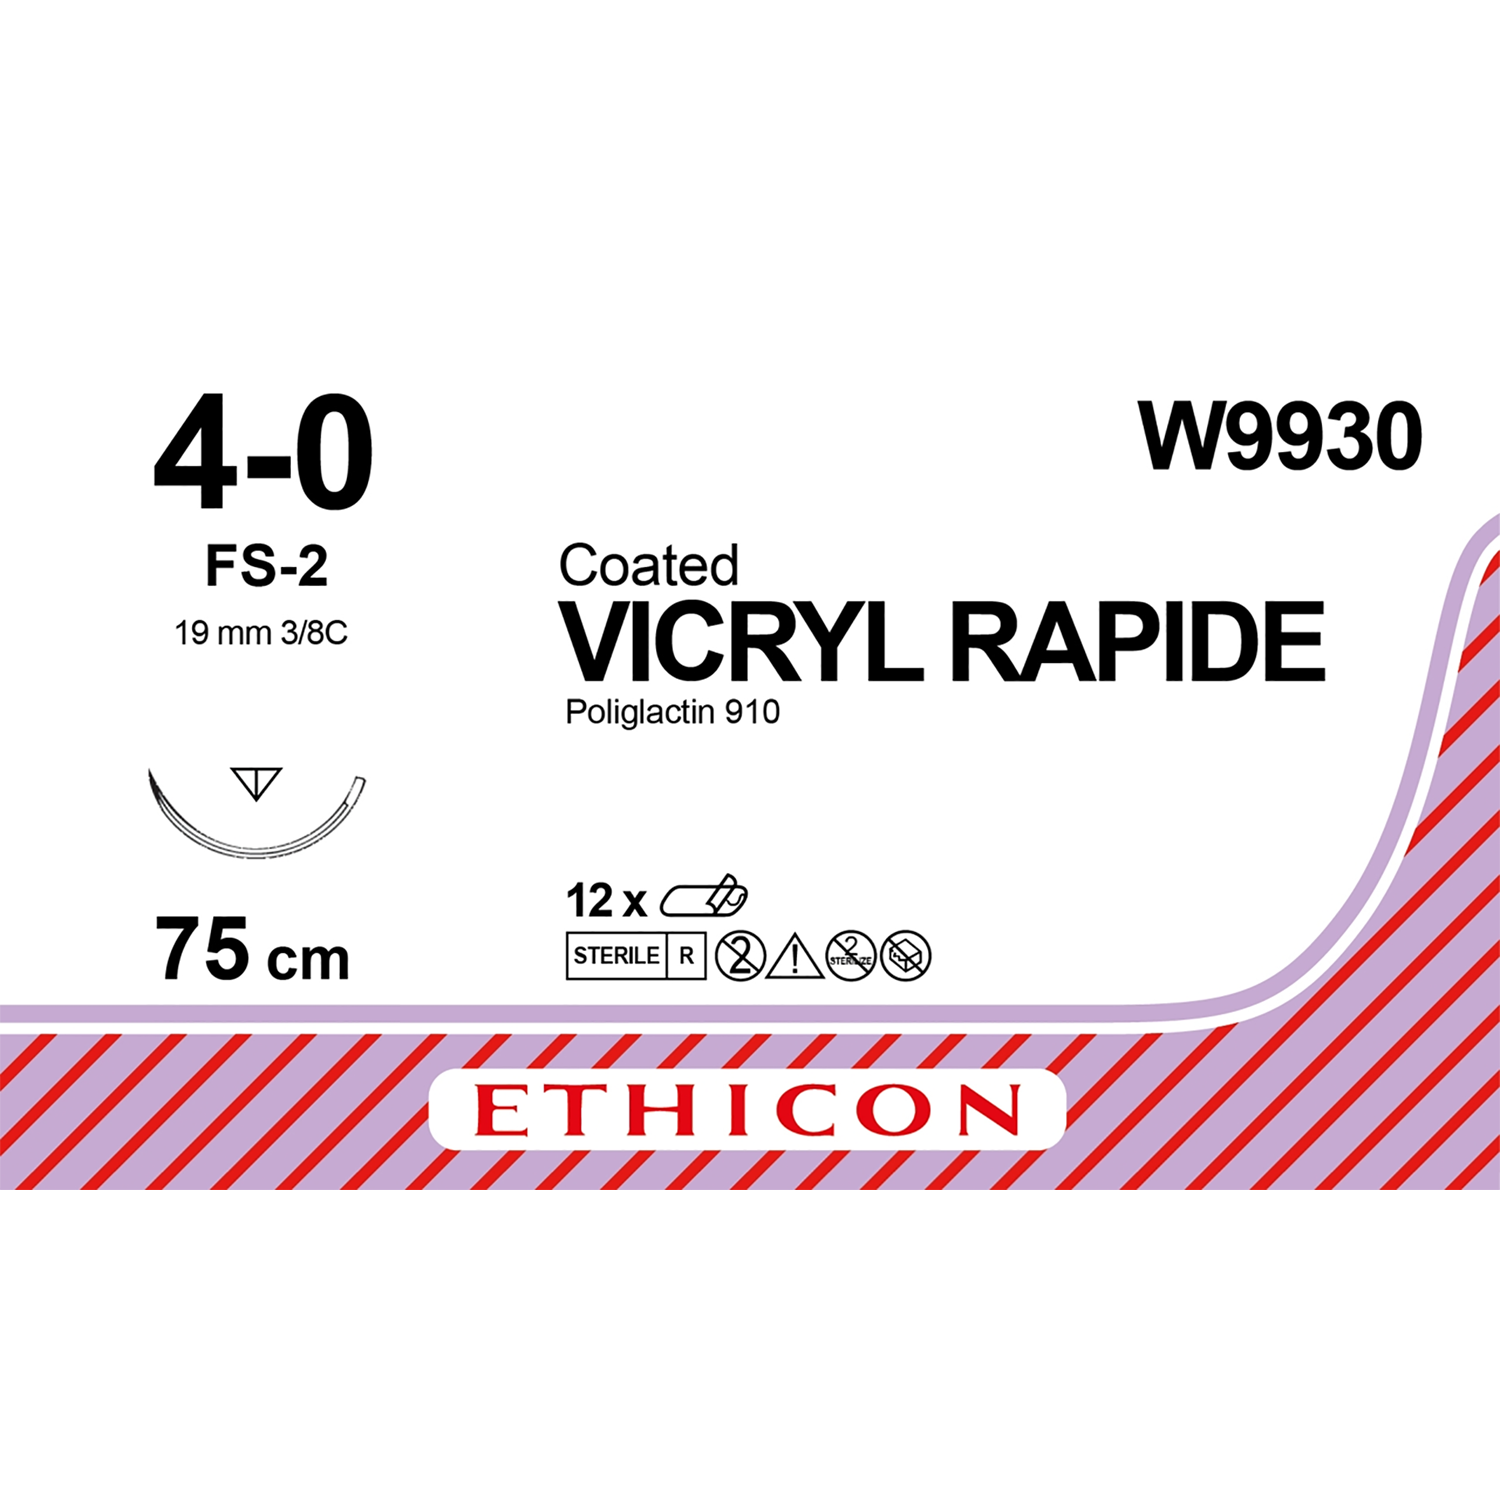 Ethicon Vicryl Rapide Suture | Absorbable | Undyed | Size: 4-0 | Length: 75cm | Needle: FS-2 | Pack of 12